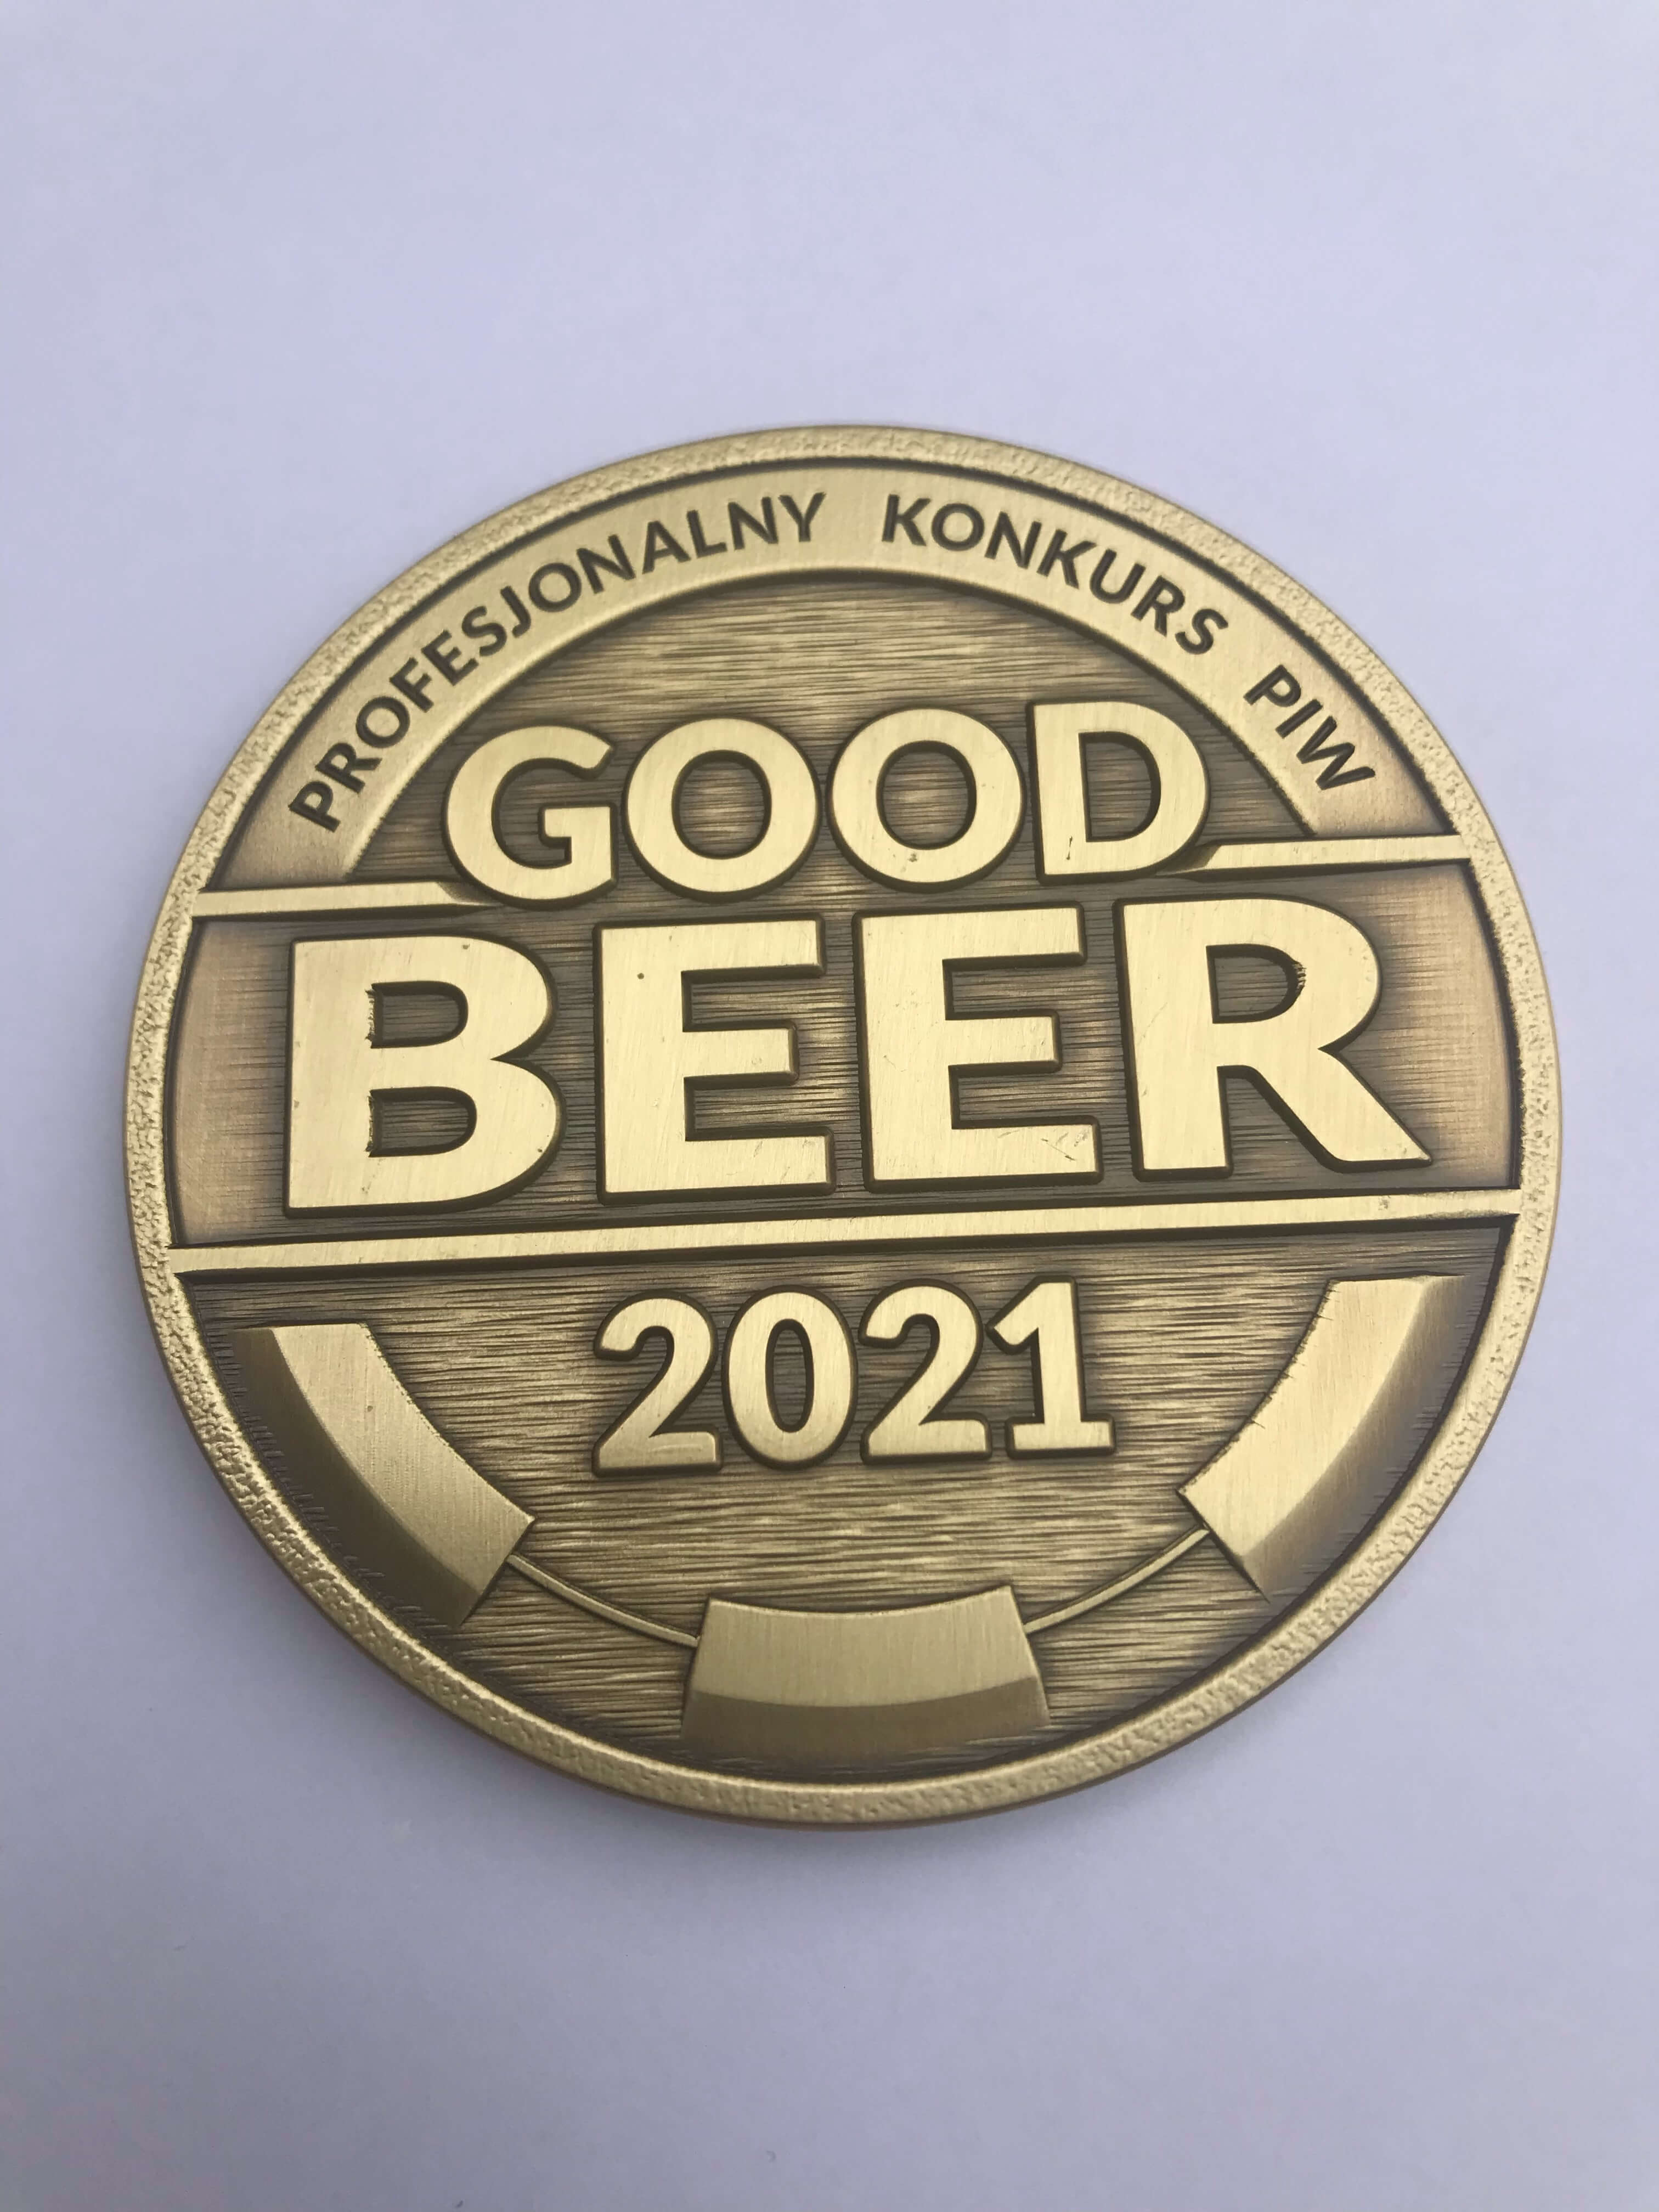 Gold medal for Tyskie 0.0% at the Good Beer 2021 competition